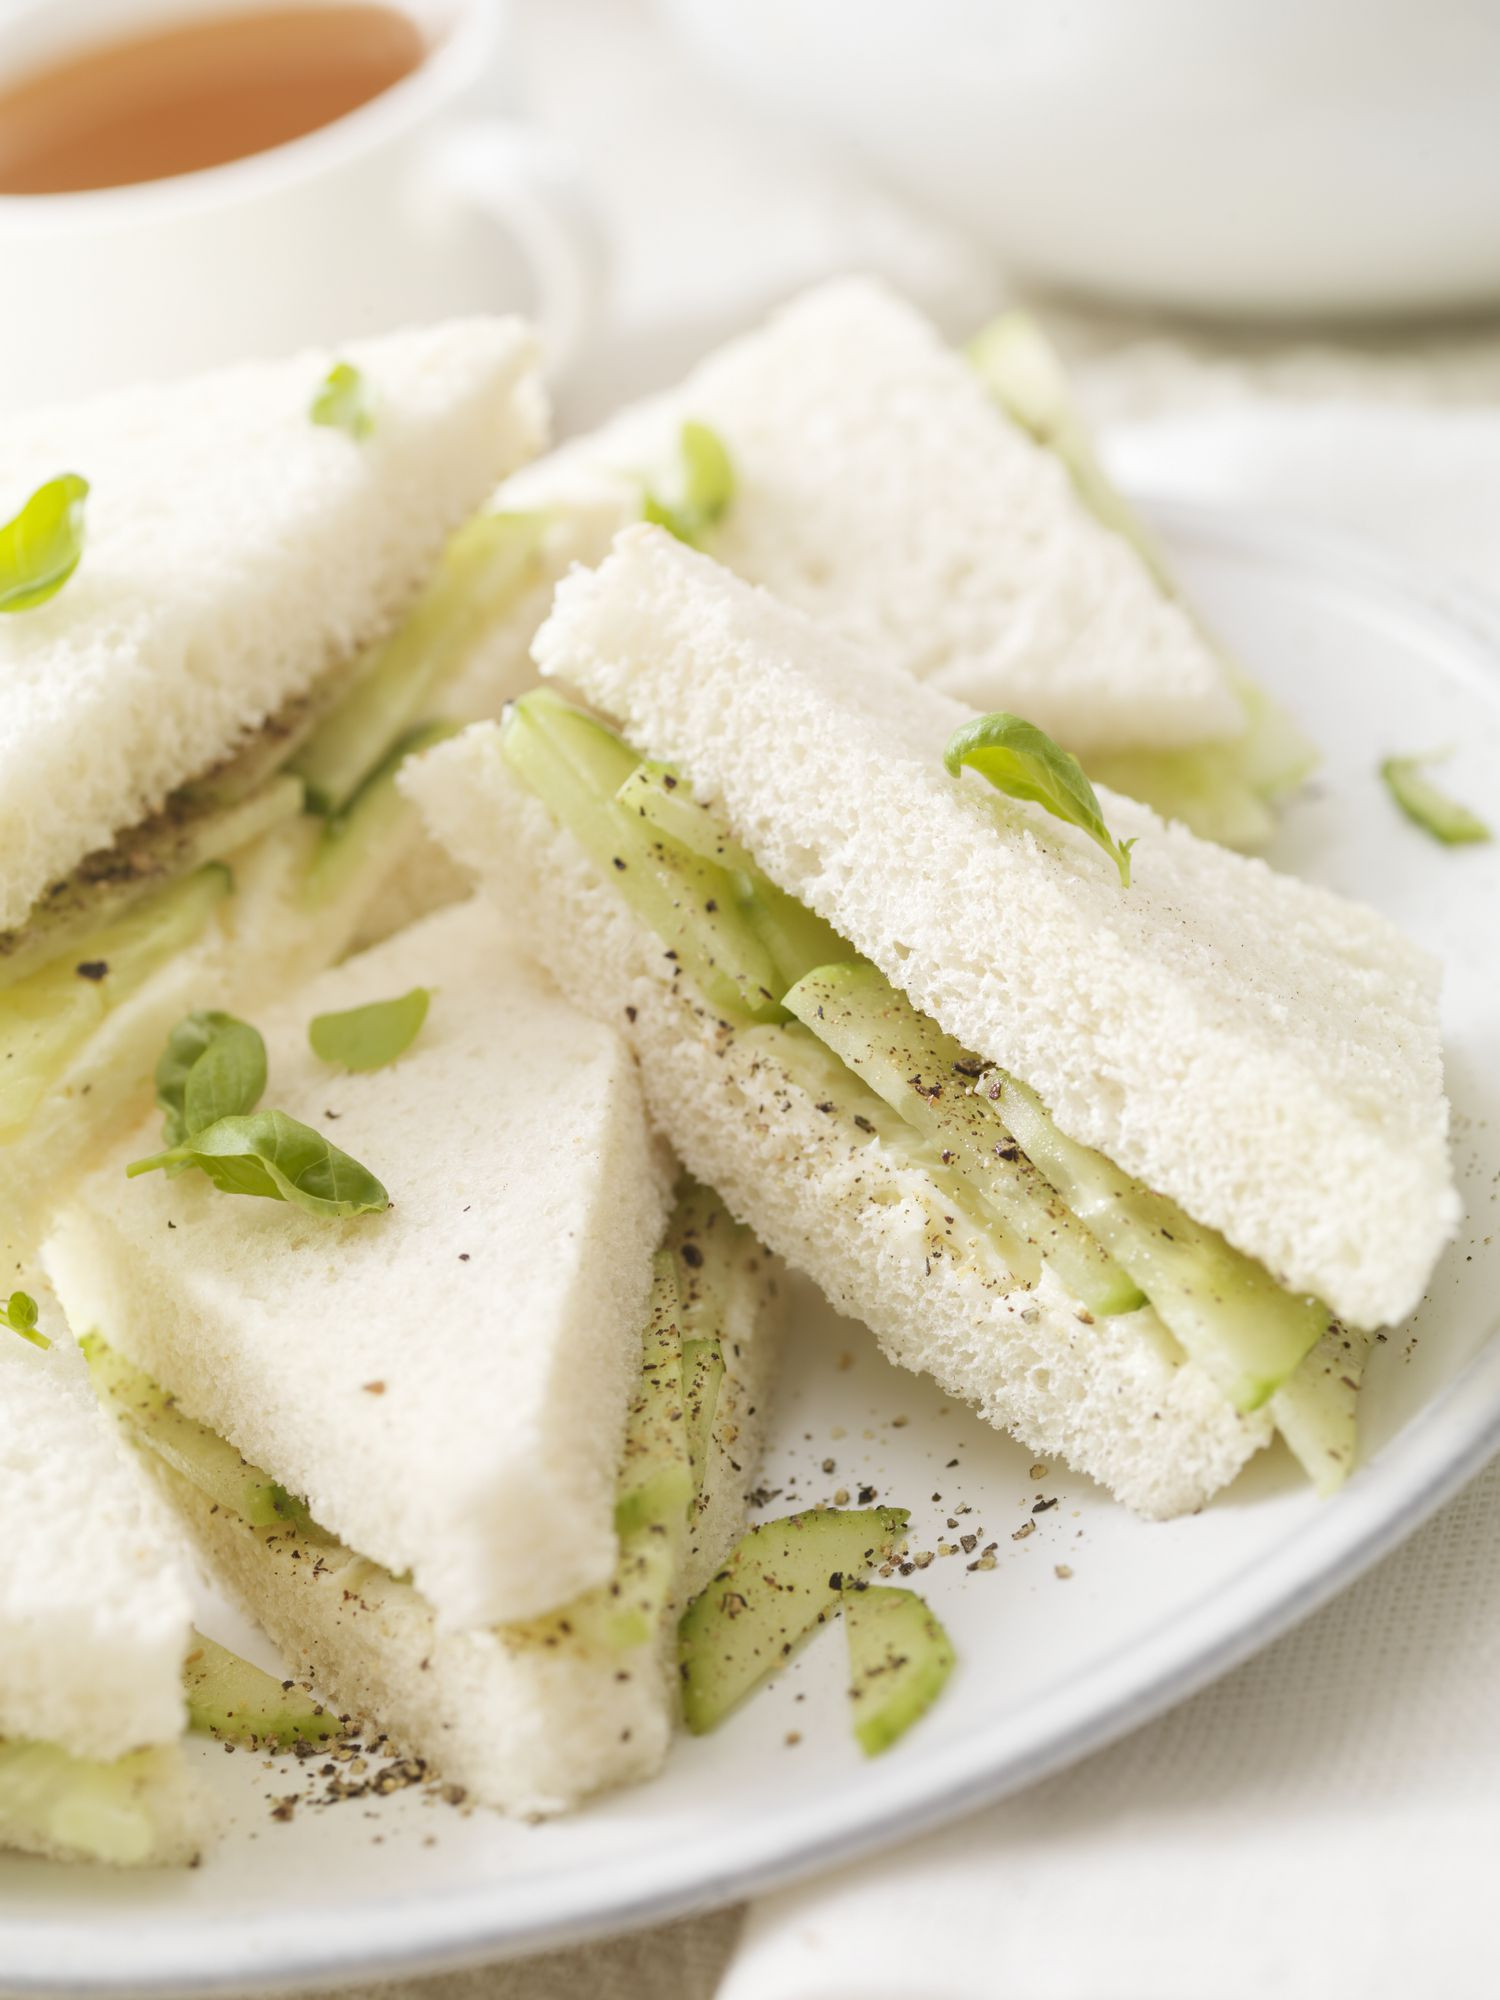 Cucumber Tea Sandwiches with Cream Cheese New Cucumber Cream Cheese Tea Sandwiches Recipe